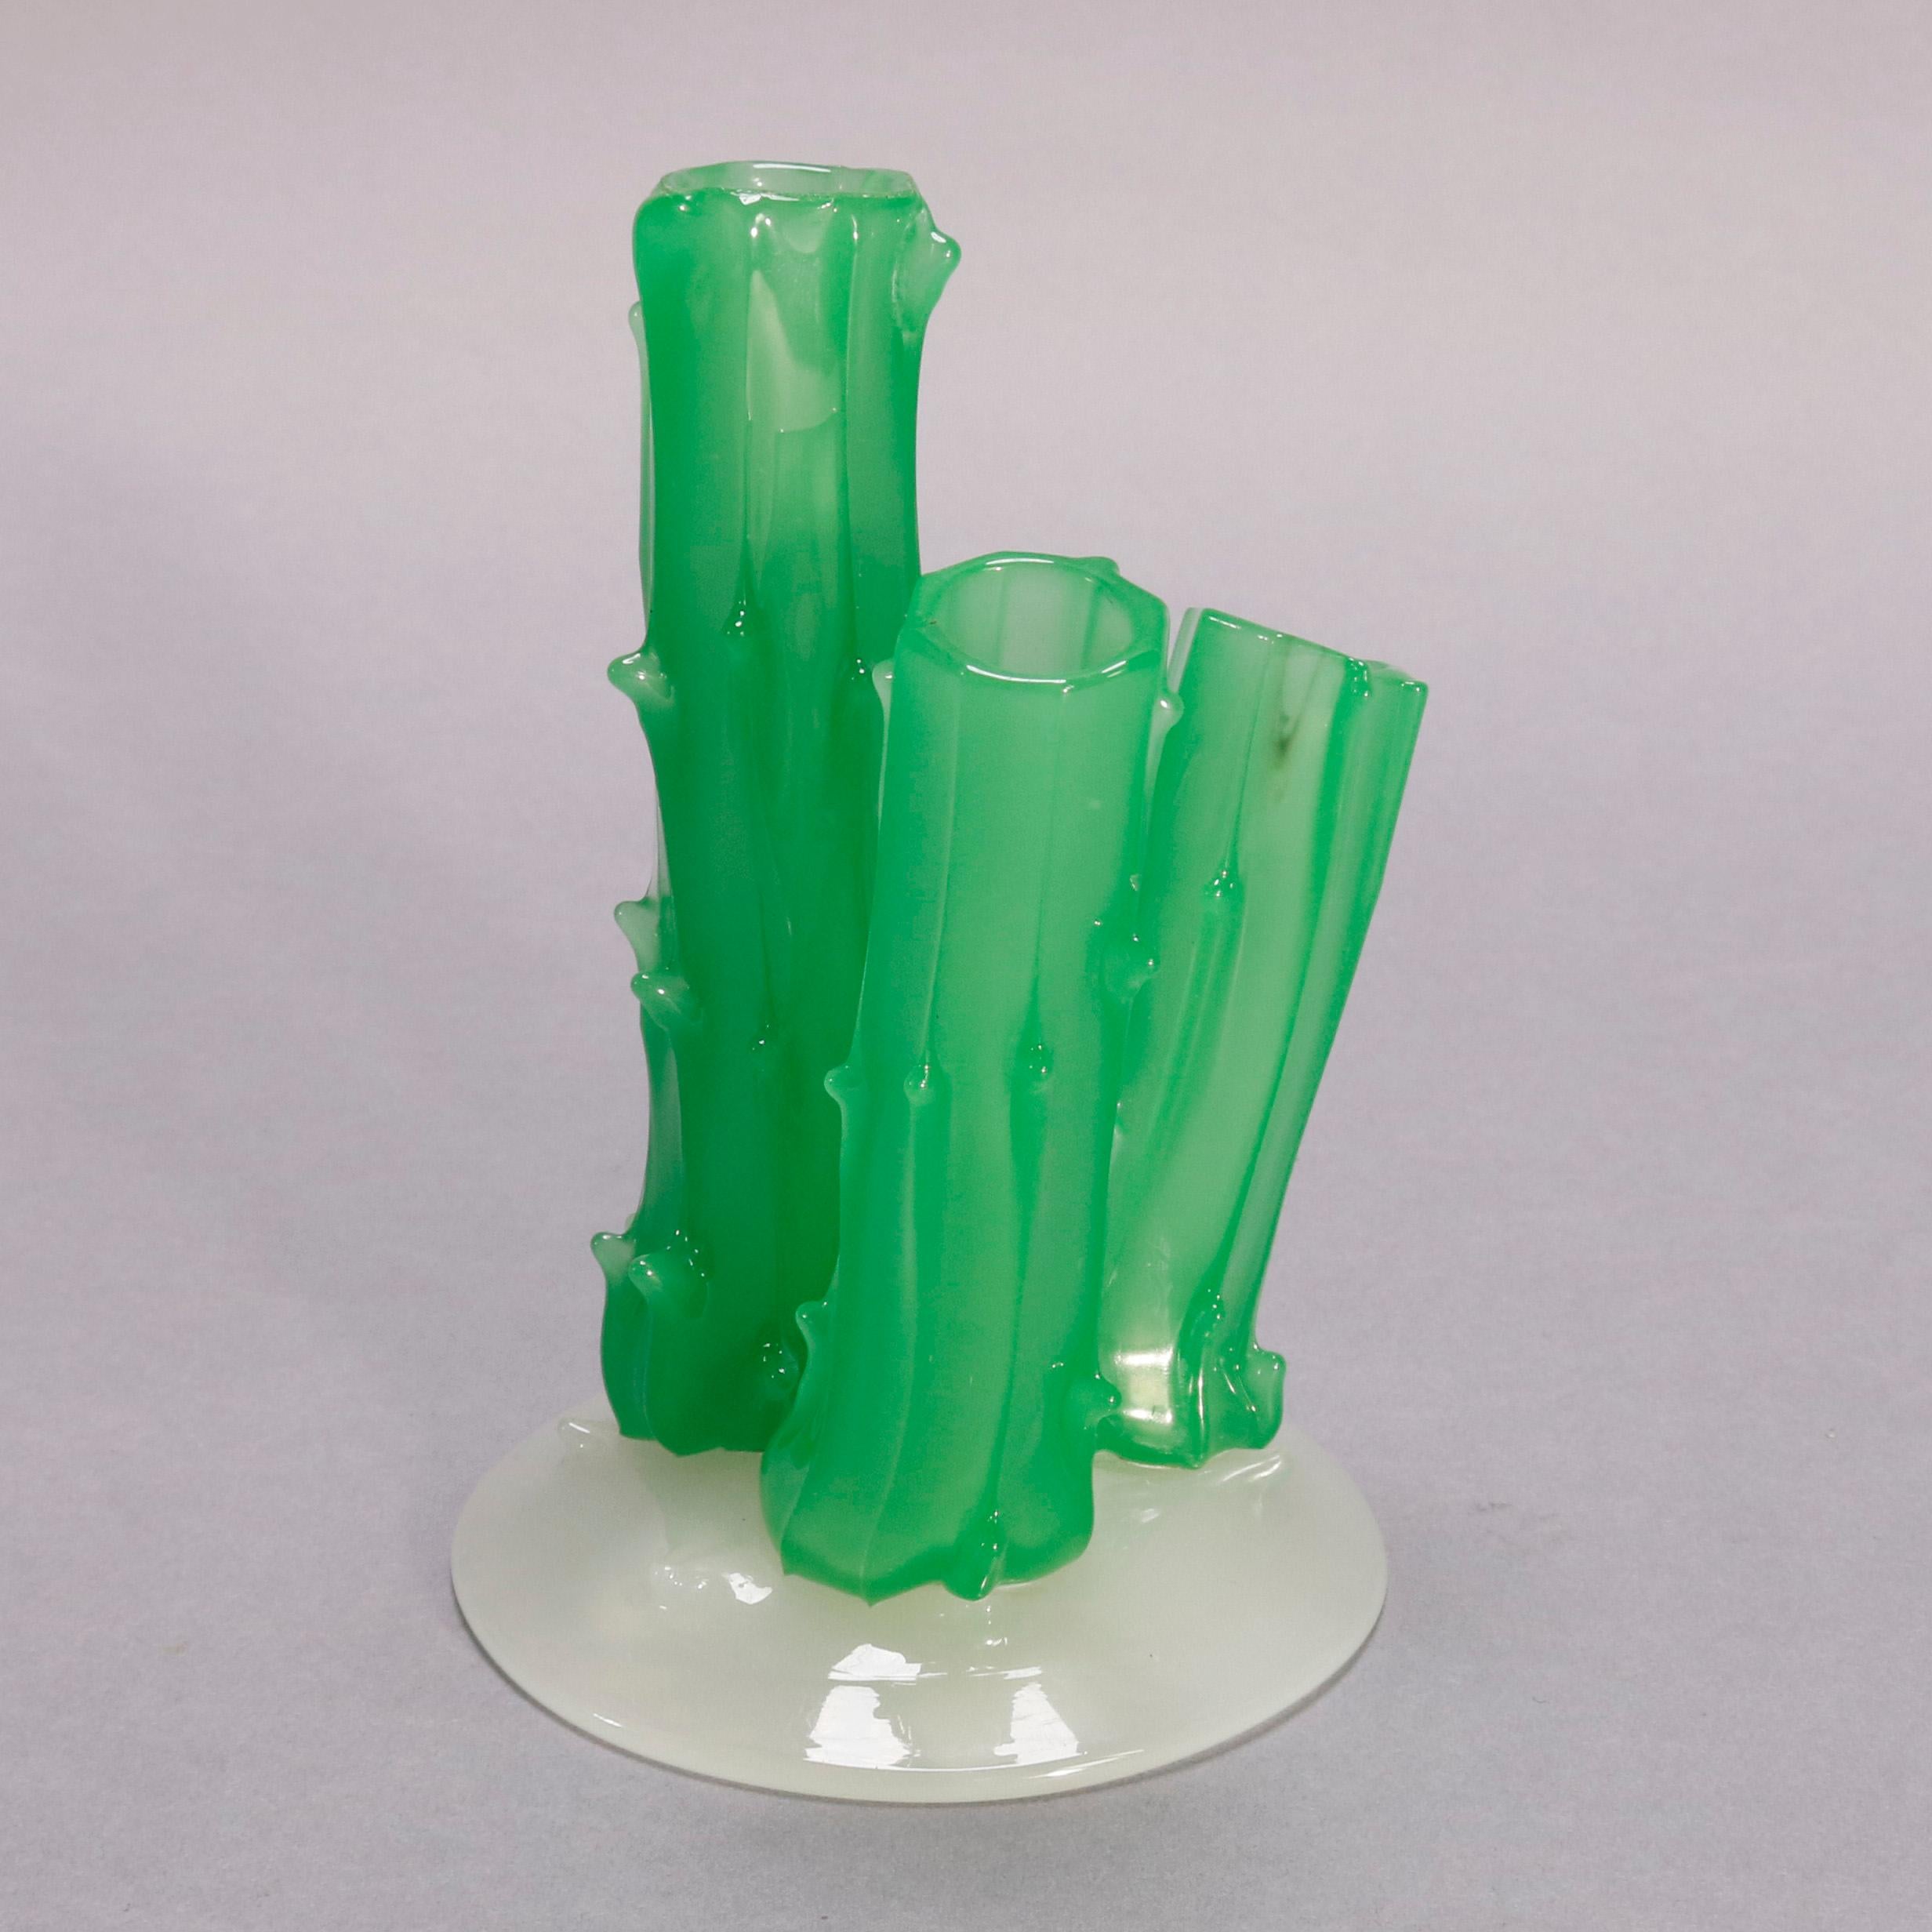 An antique Steuben Carder art glass vase offers three prongs having trunk form in jade green and mounted on calcite base, signed on base, circa 1920

Measures: 6.25